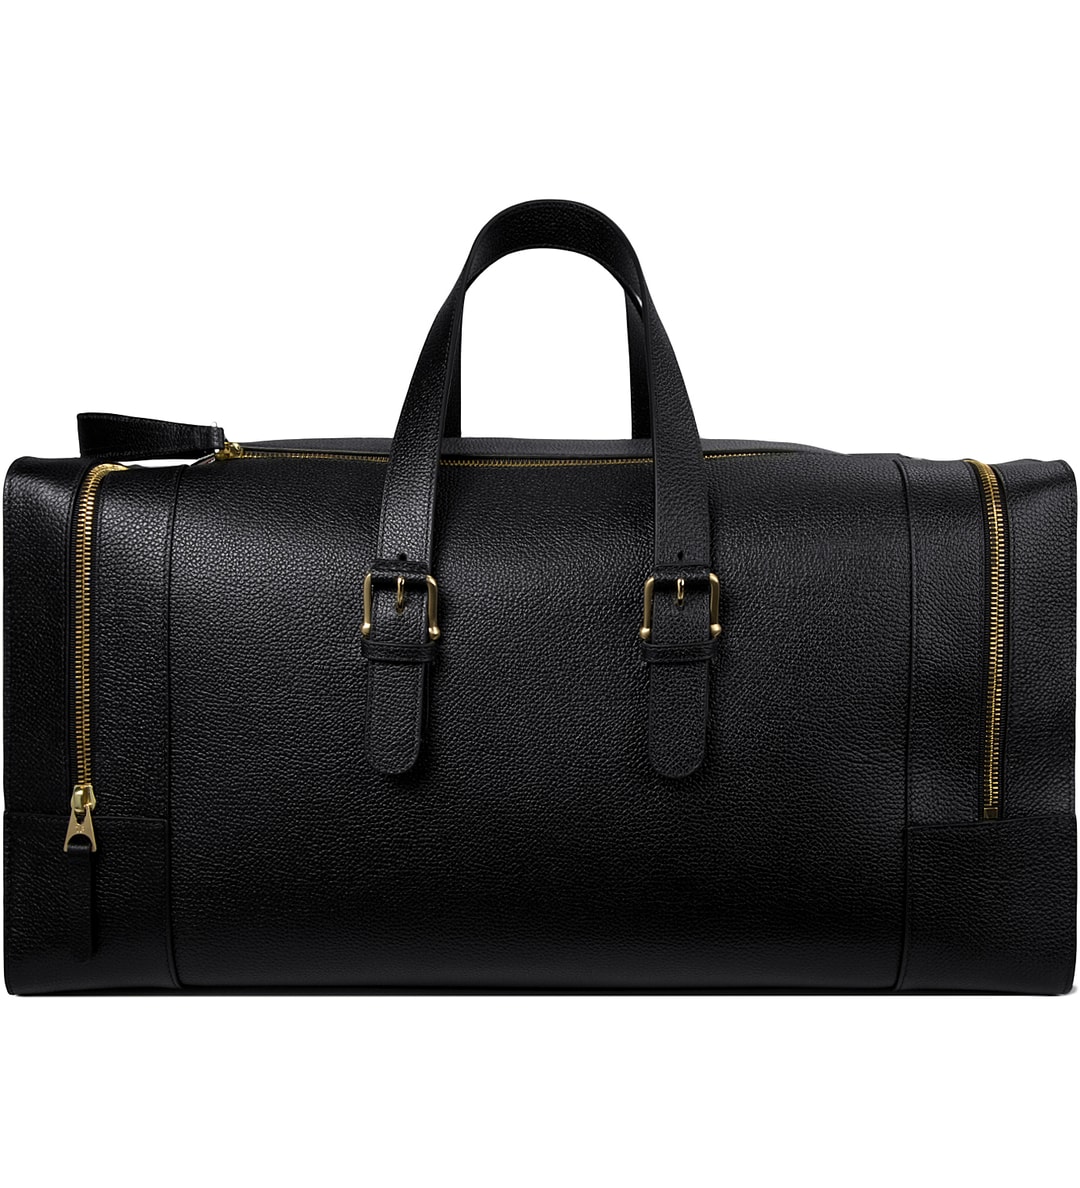 Thom Browne - Black Grained Leather Duffle Bag | HBX - Globally Curated ...